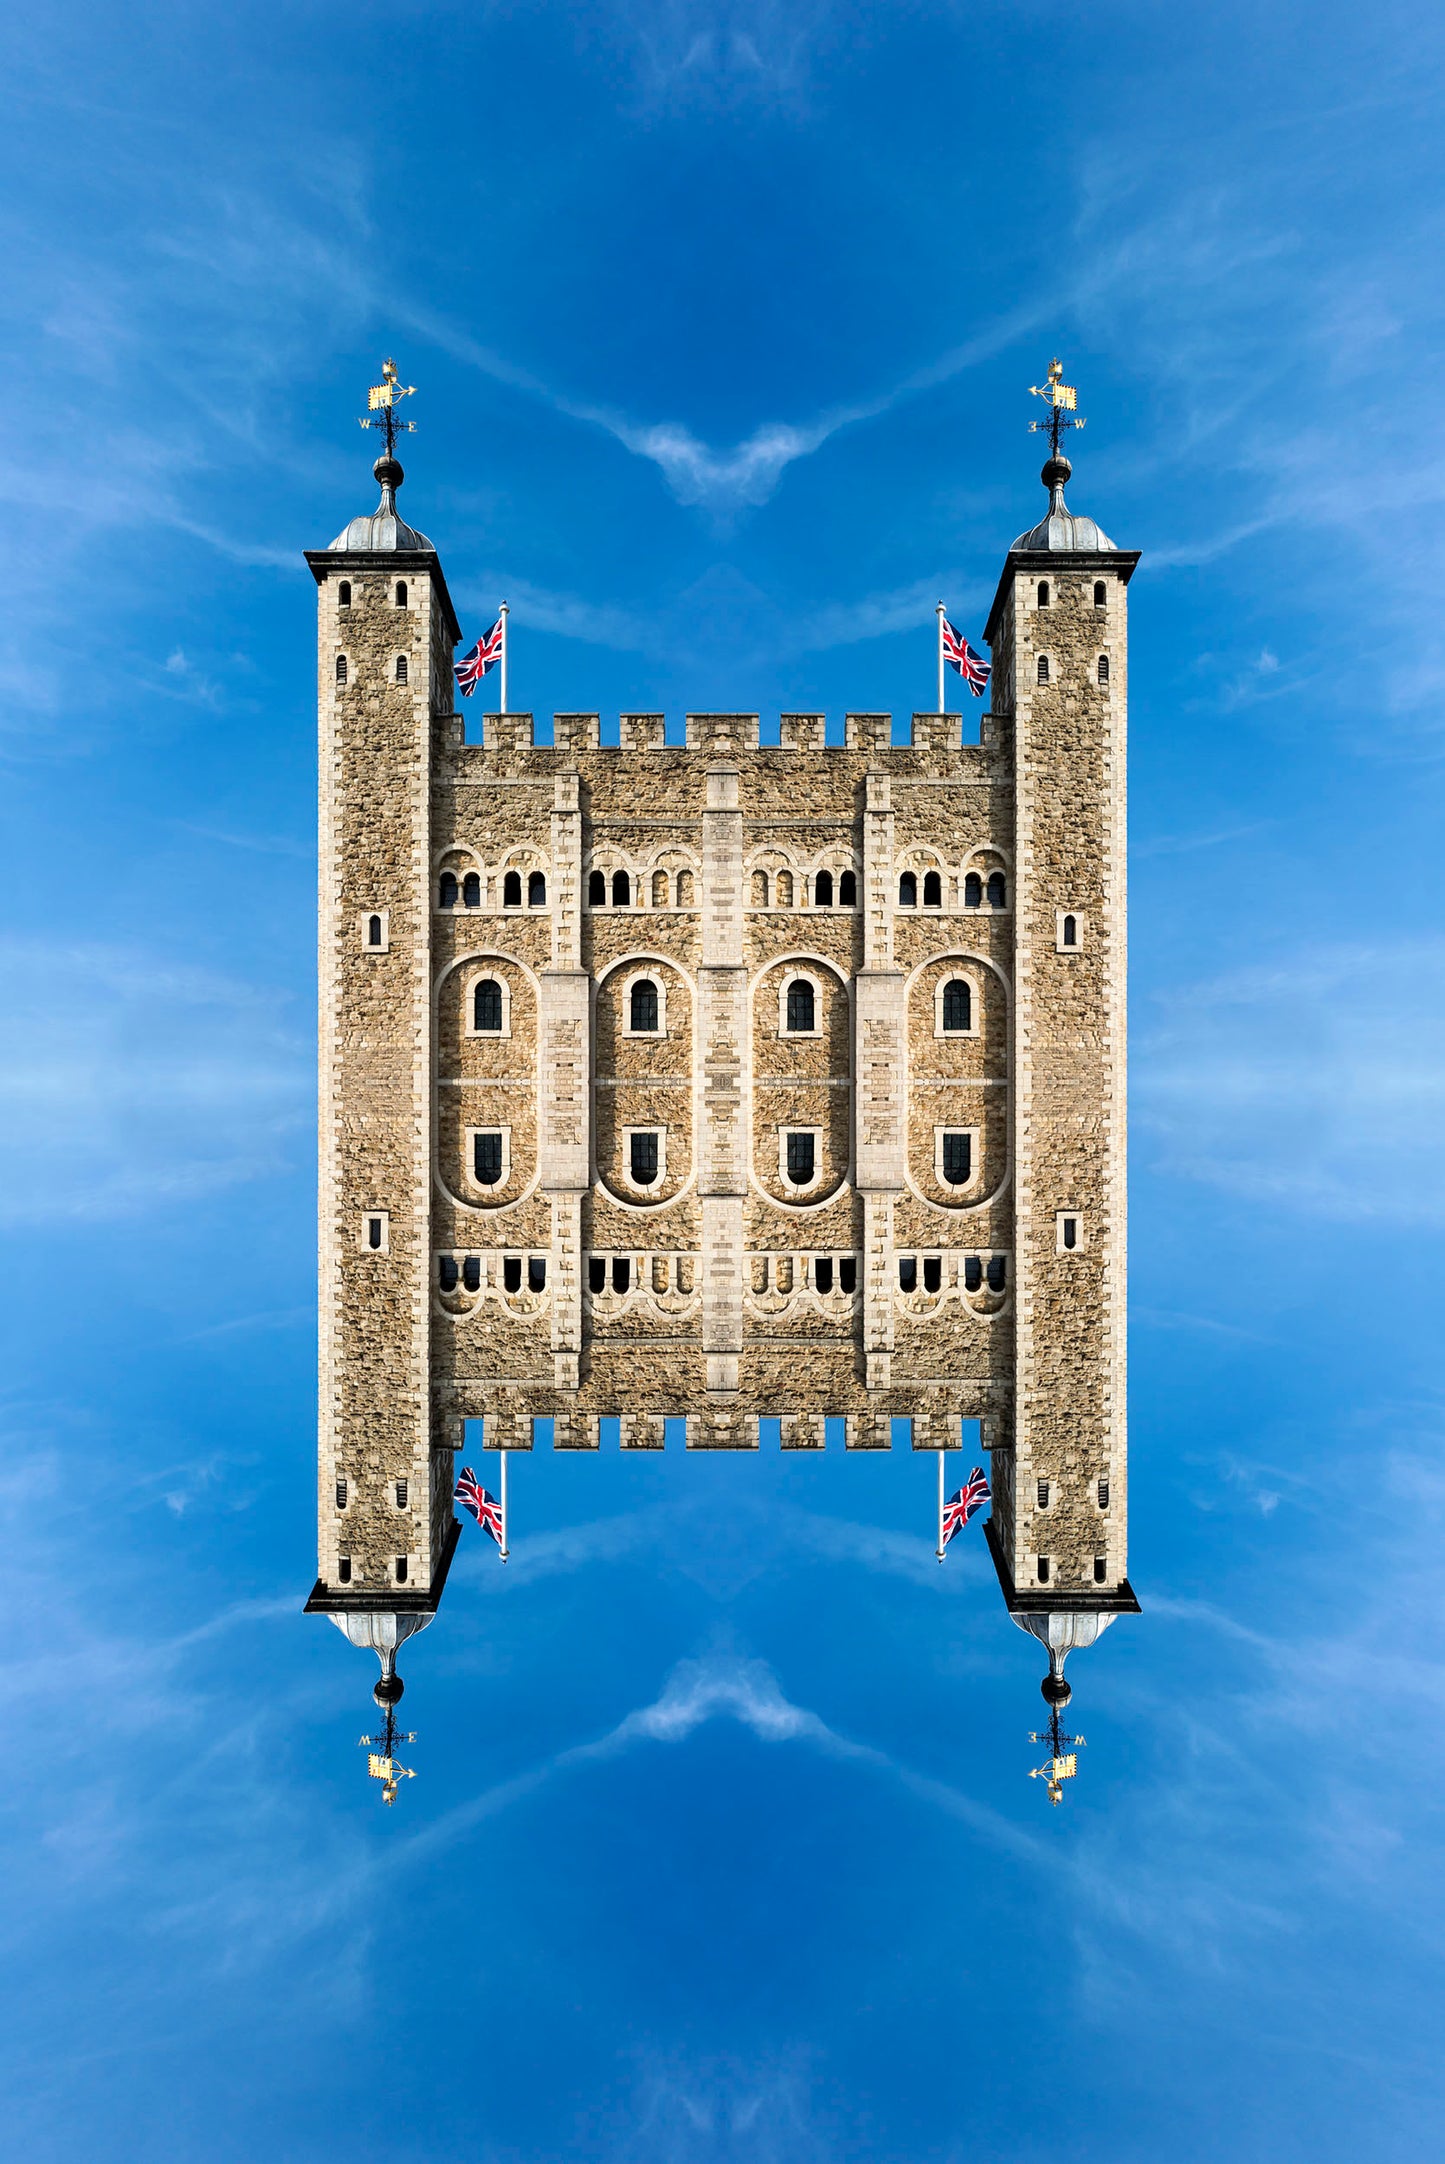 Daniel-Sambraus-Tower-Of-London-Limited-Edition-Digital-Photography-TAP-Galleries, Essex gallery 